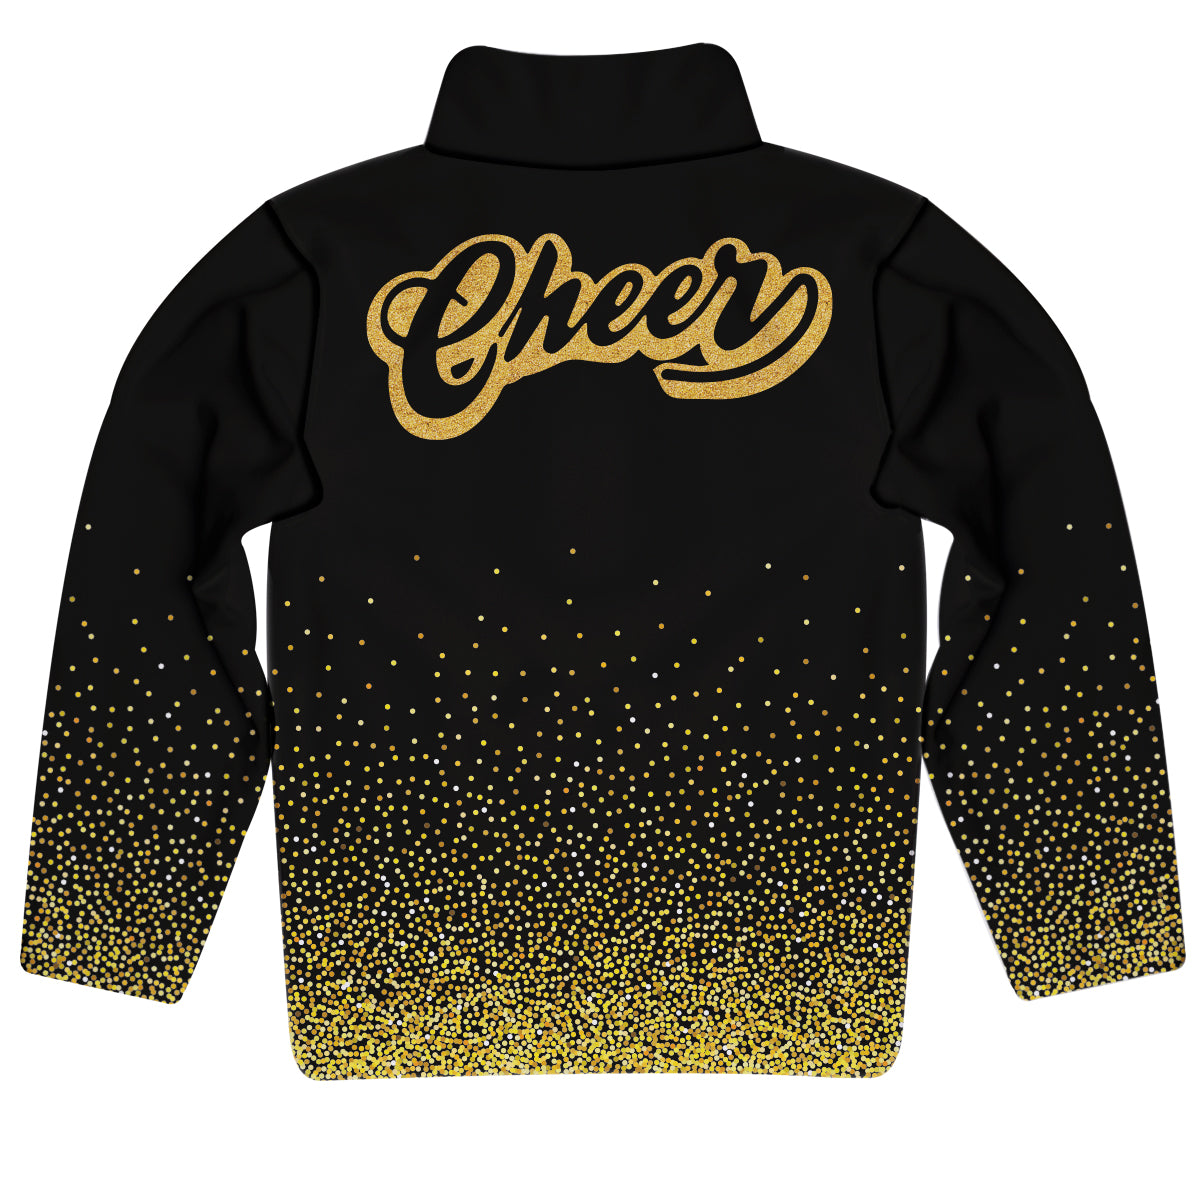 Cheer Monogram Black and Gold Polka Dots Heavy Weight Performance 4-way Stretch 1/4 Zip Pullover - Wimziy&Co.